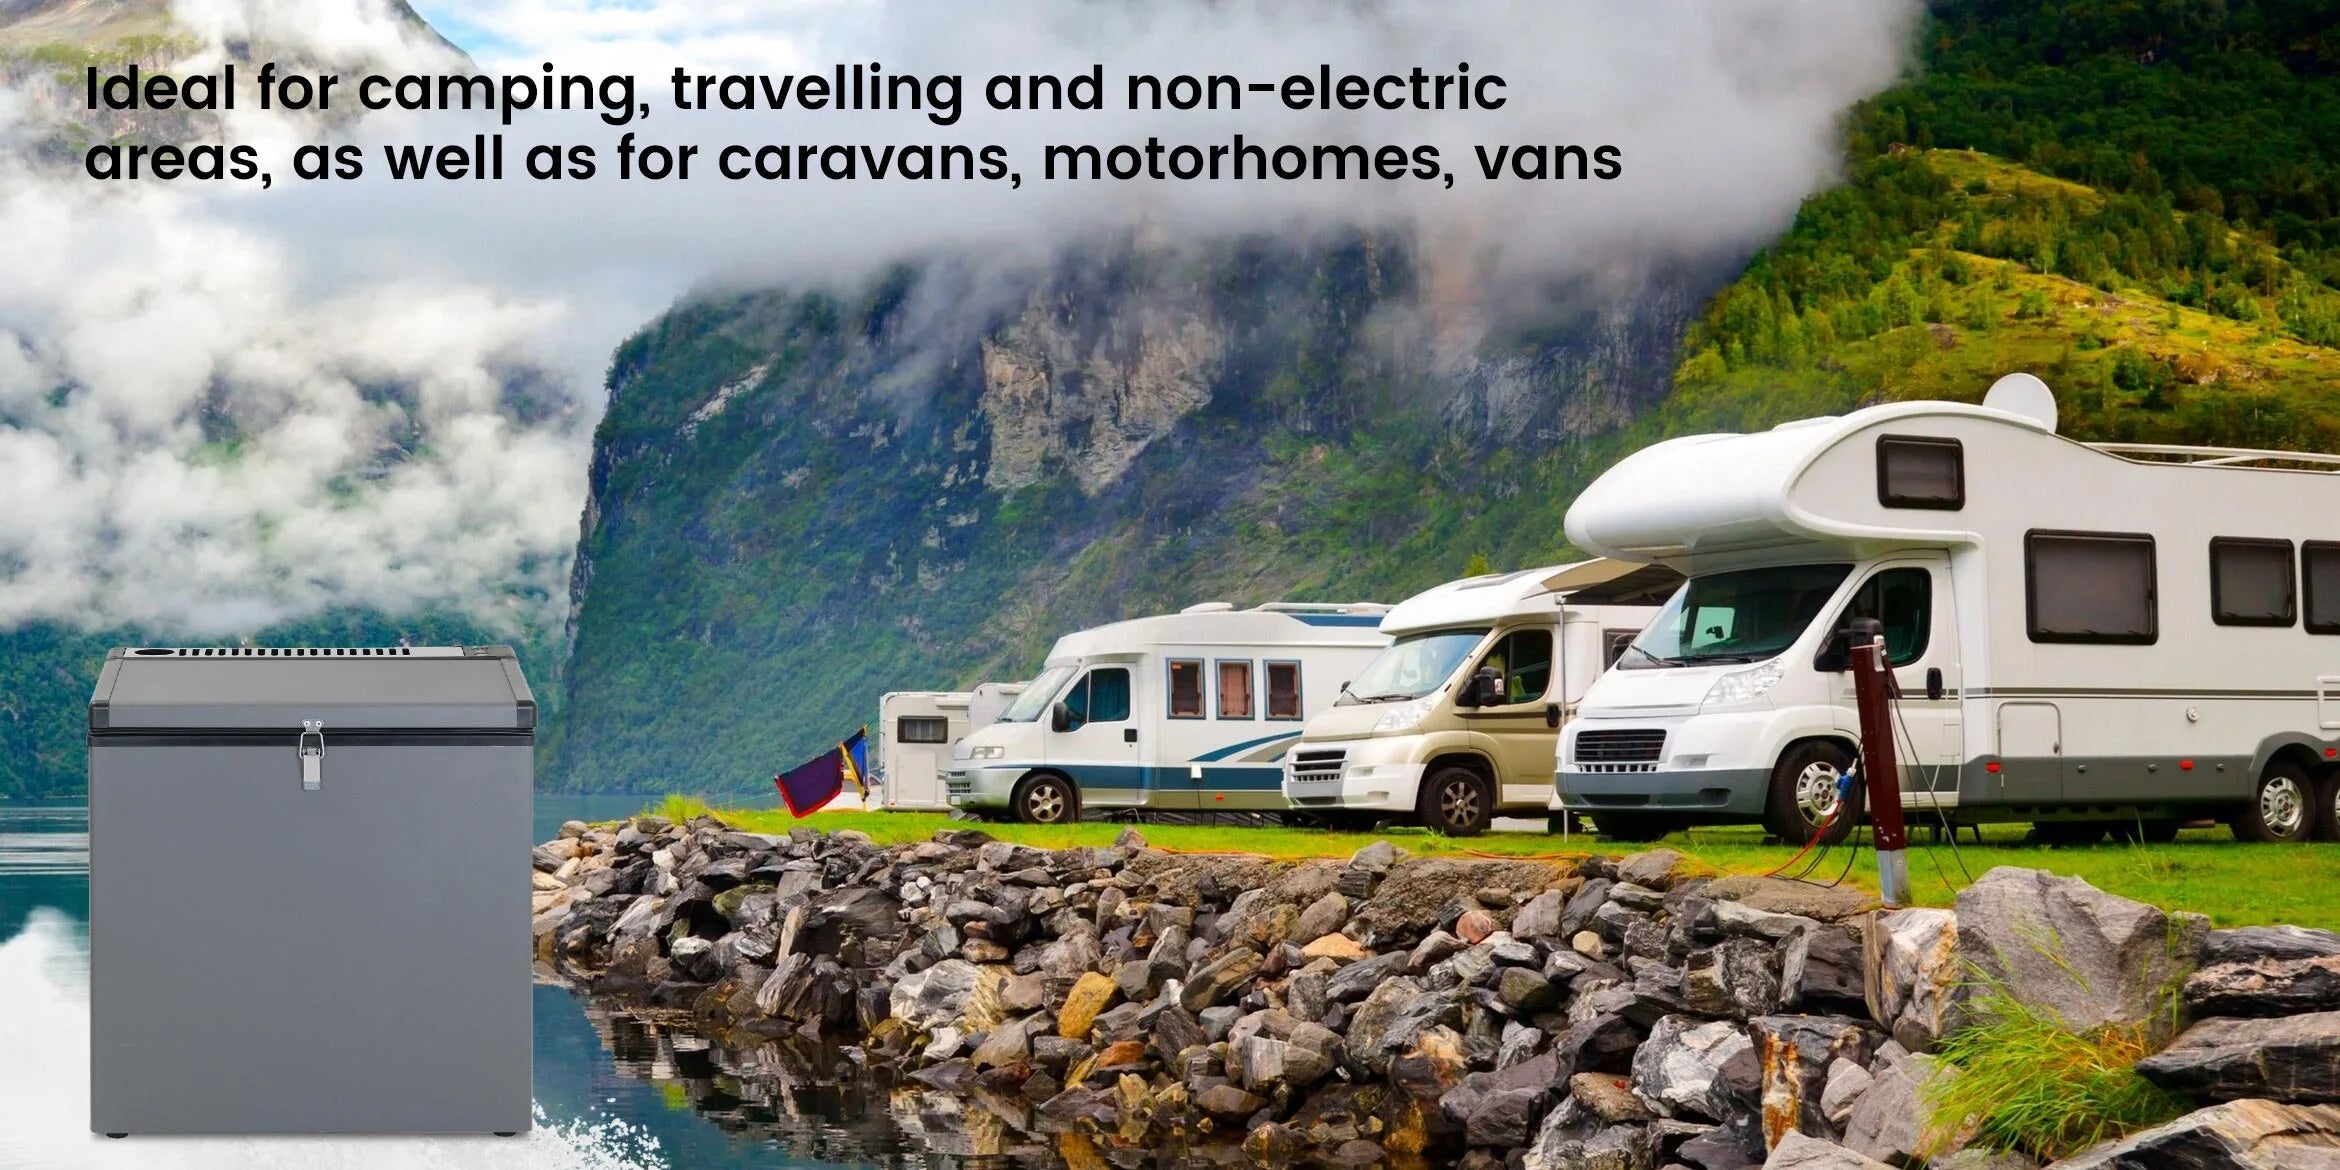 Ideal for camping, travelling and non-electric areas, as well as for caravans, motorhomes, vans